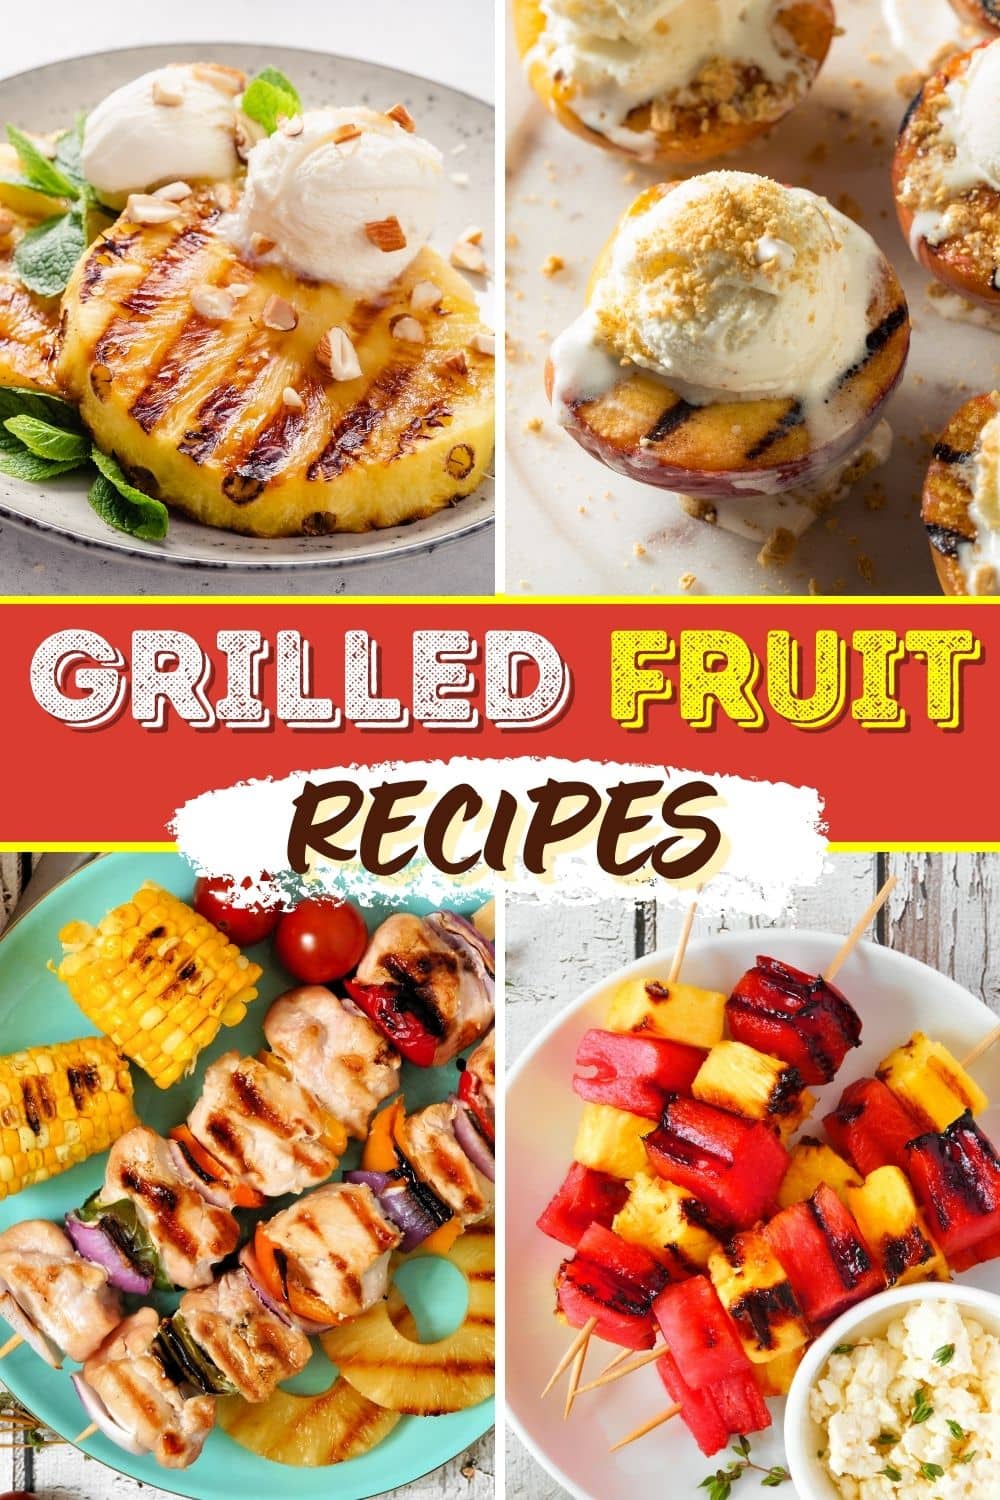 30 Best Grilled Fruit Recipes for Summer - Insanely Good